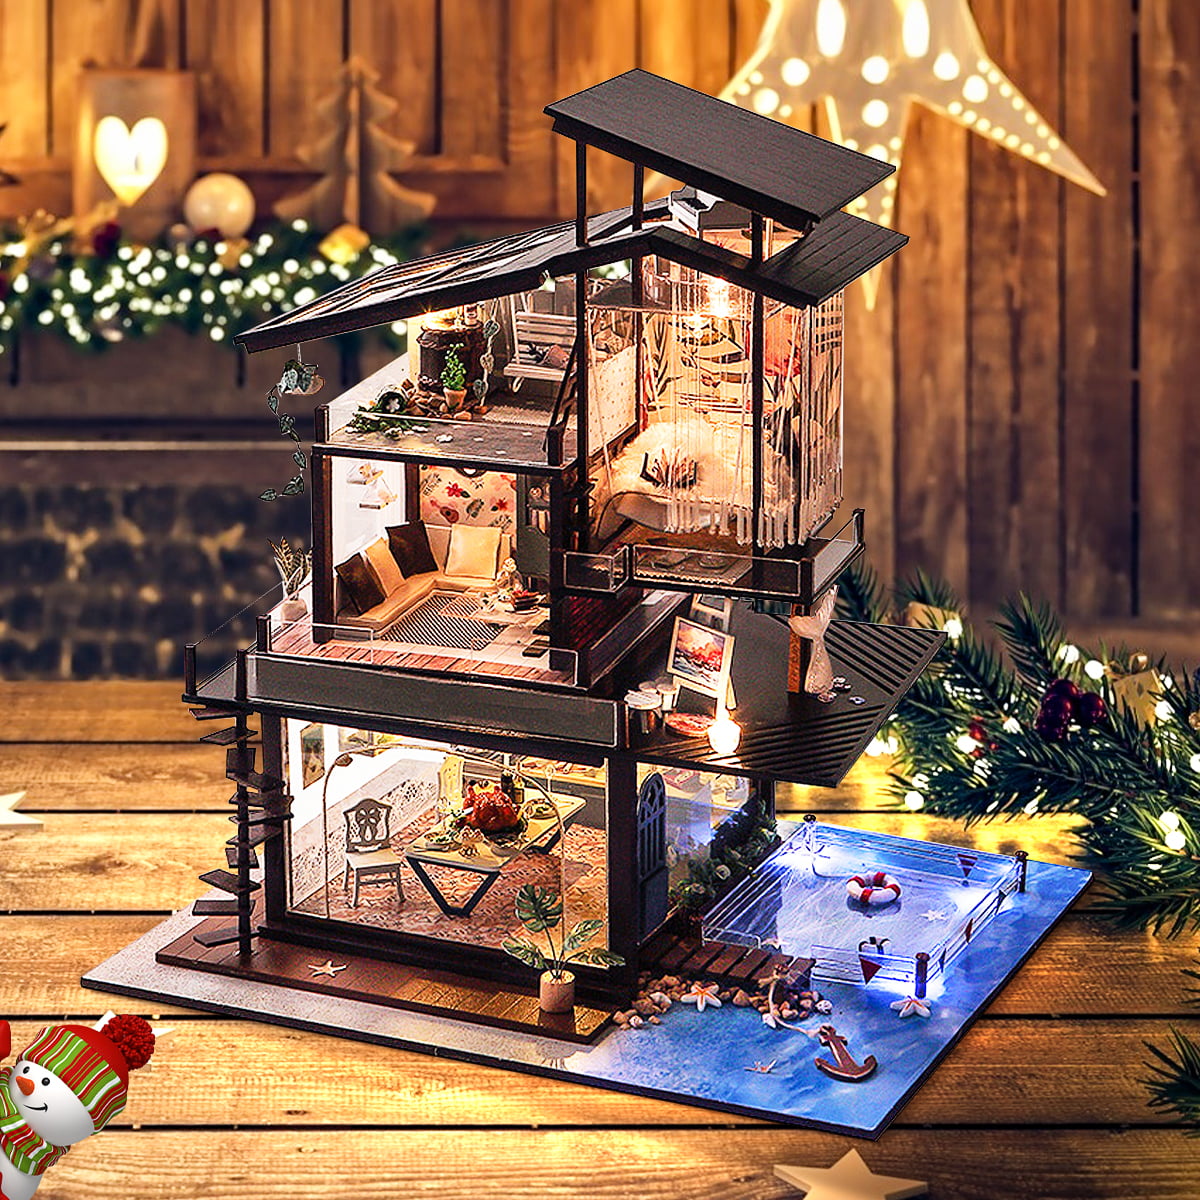 Dollhouse Miniature DIY Kit Wooden Toy Doll House Cottage With LED Lights 